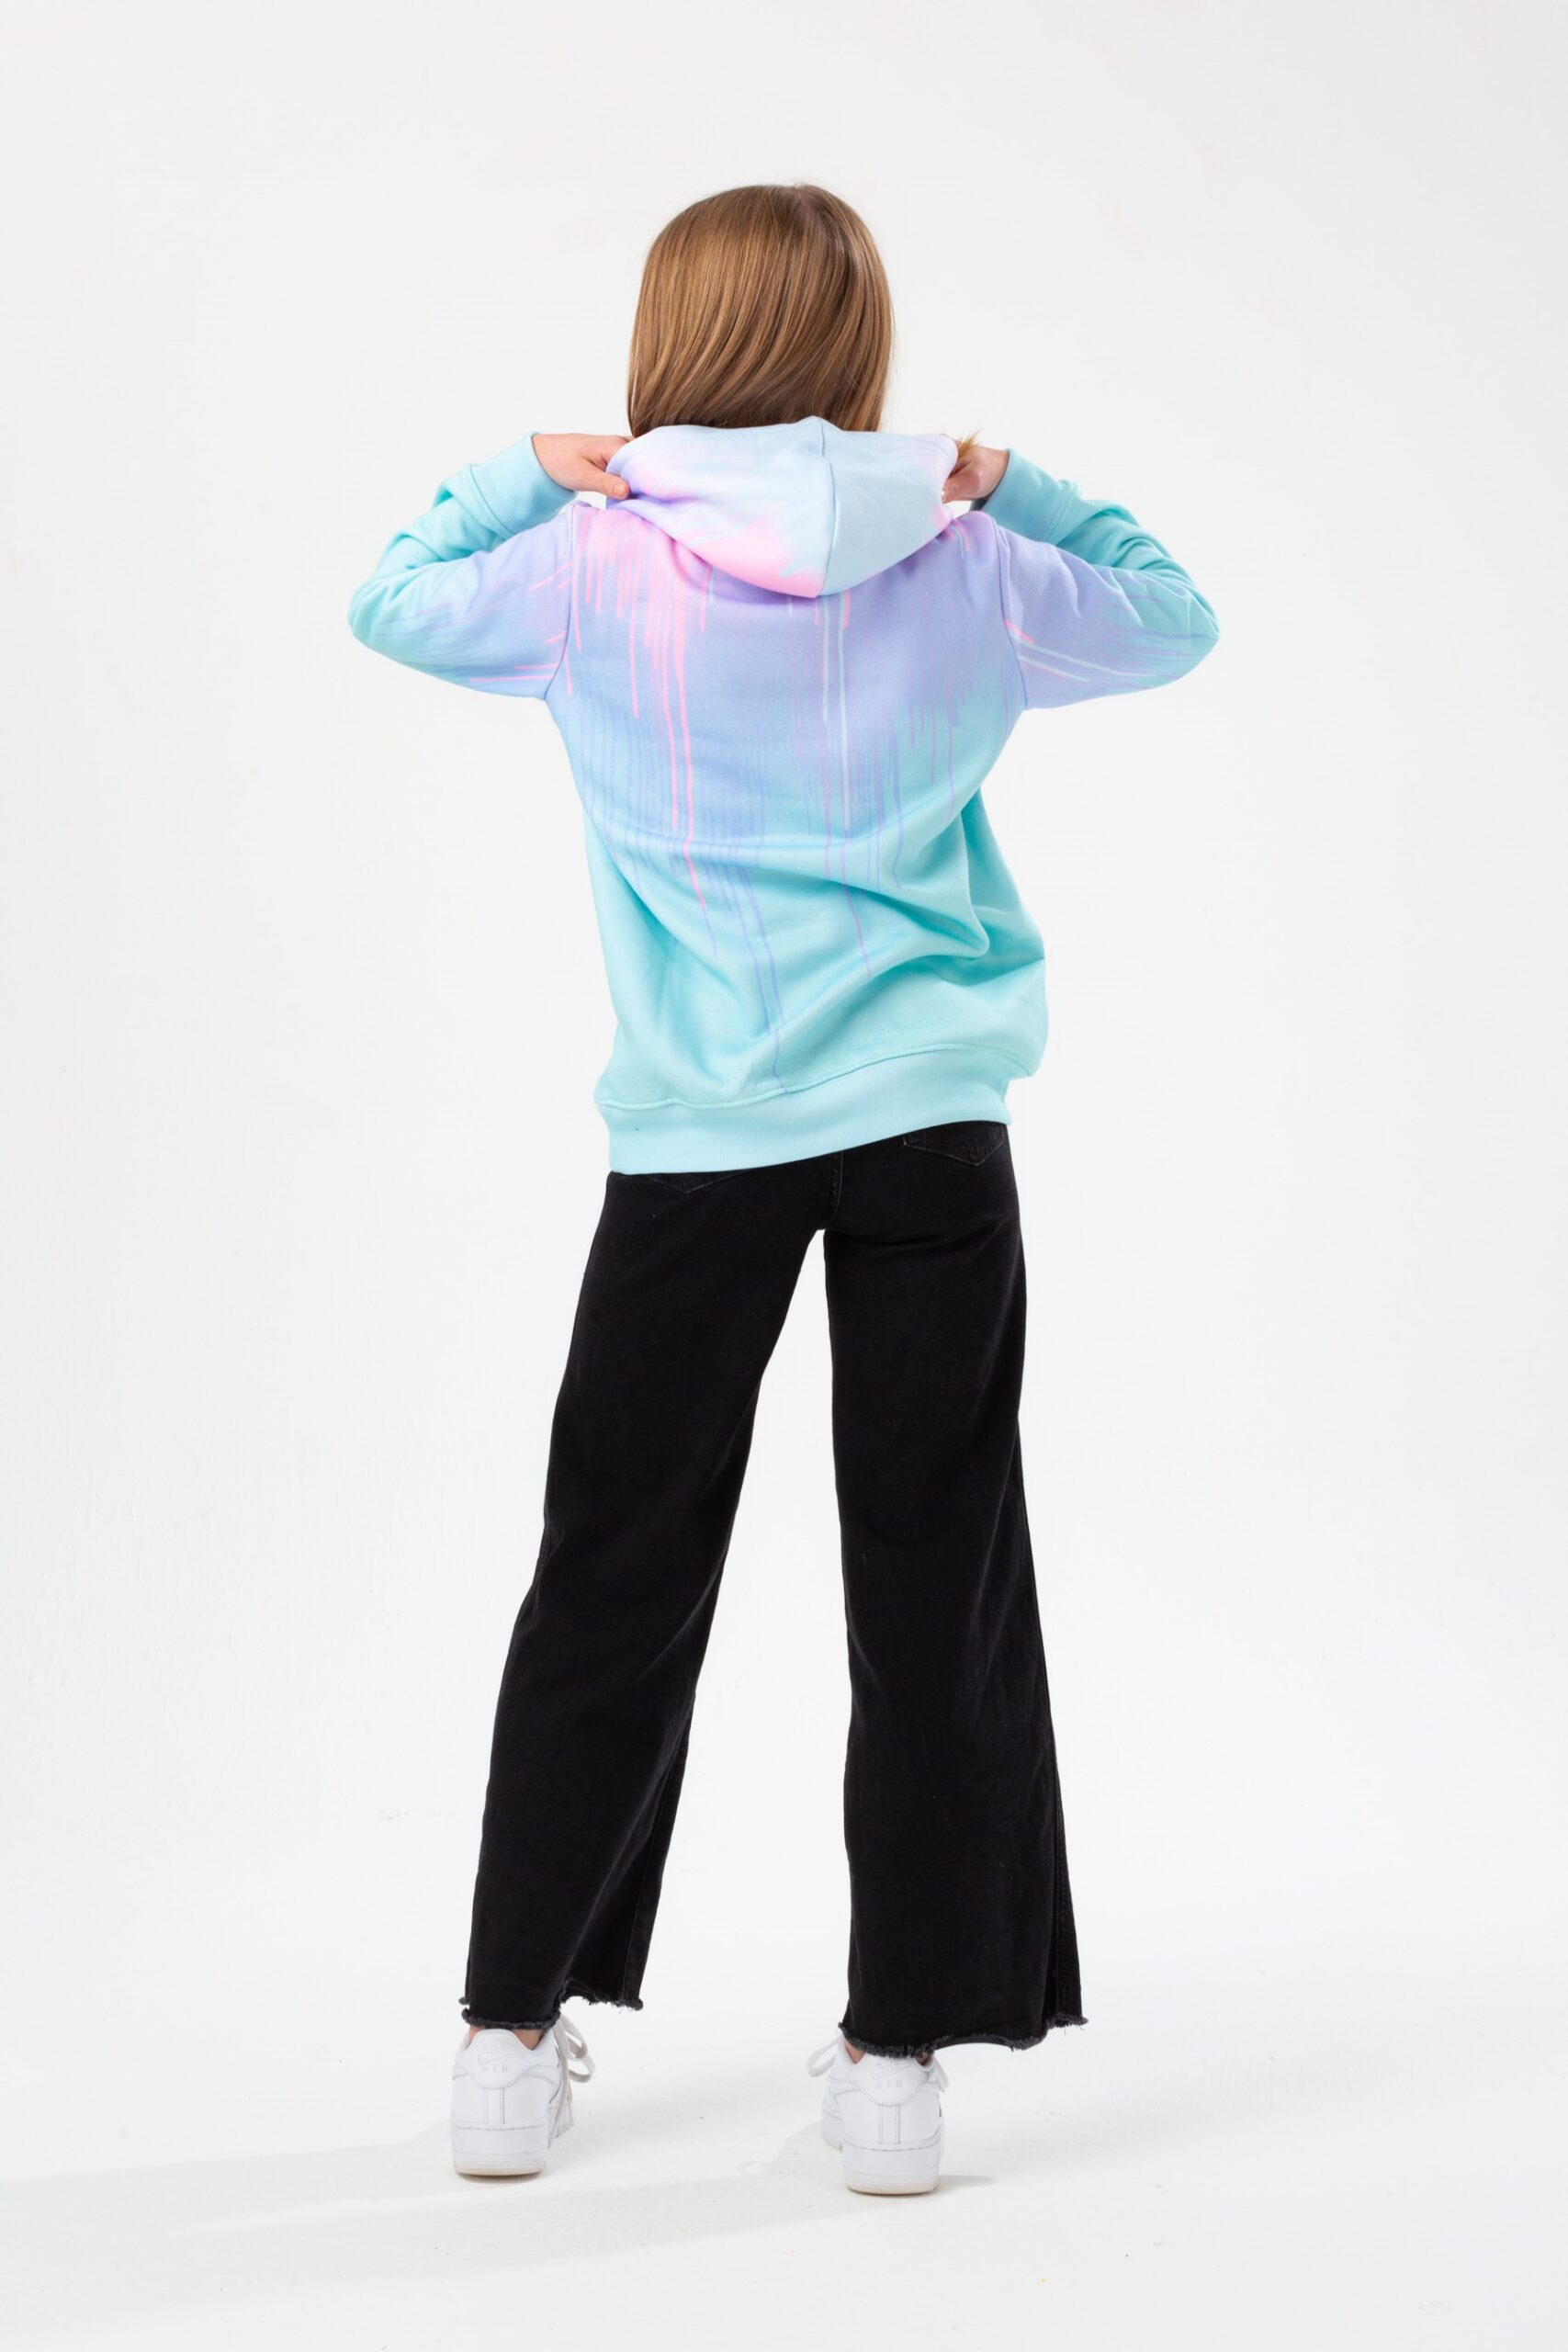 hype drip purple and turquoise hoodie on model back view